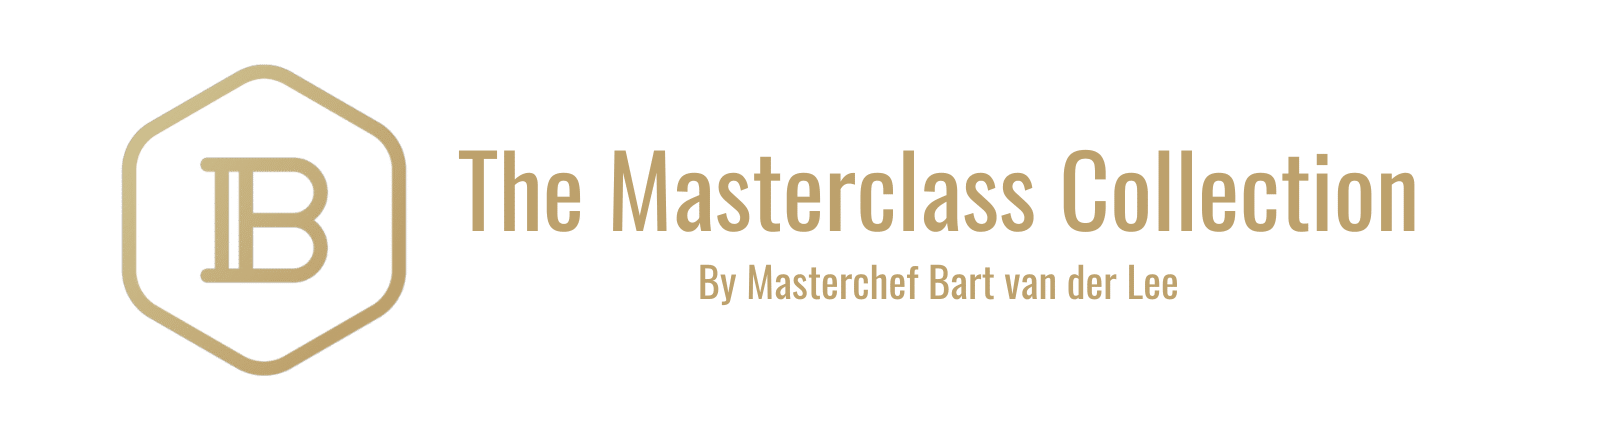 The Masterclass Collection, Cooking classes by Masterchef Bart van der Lee